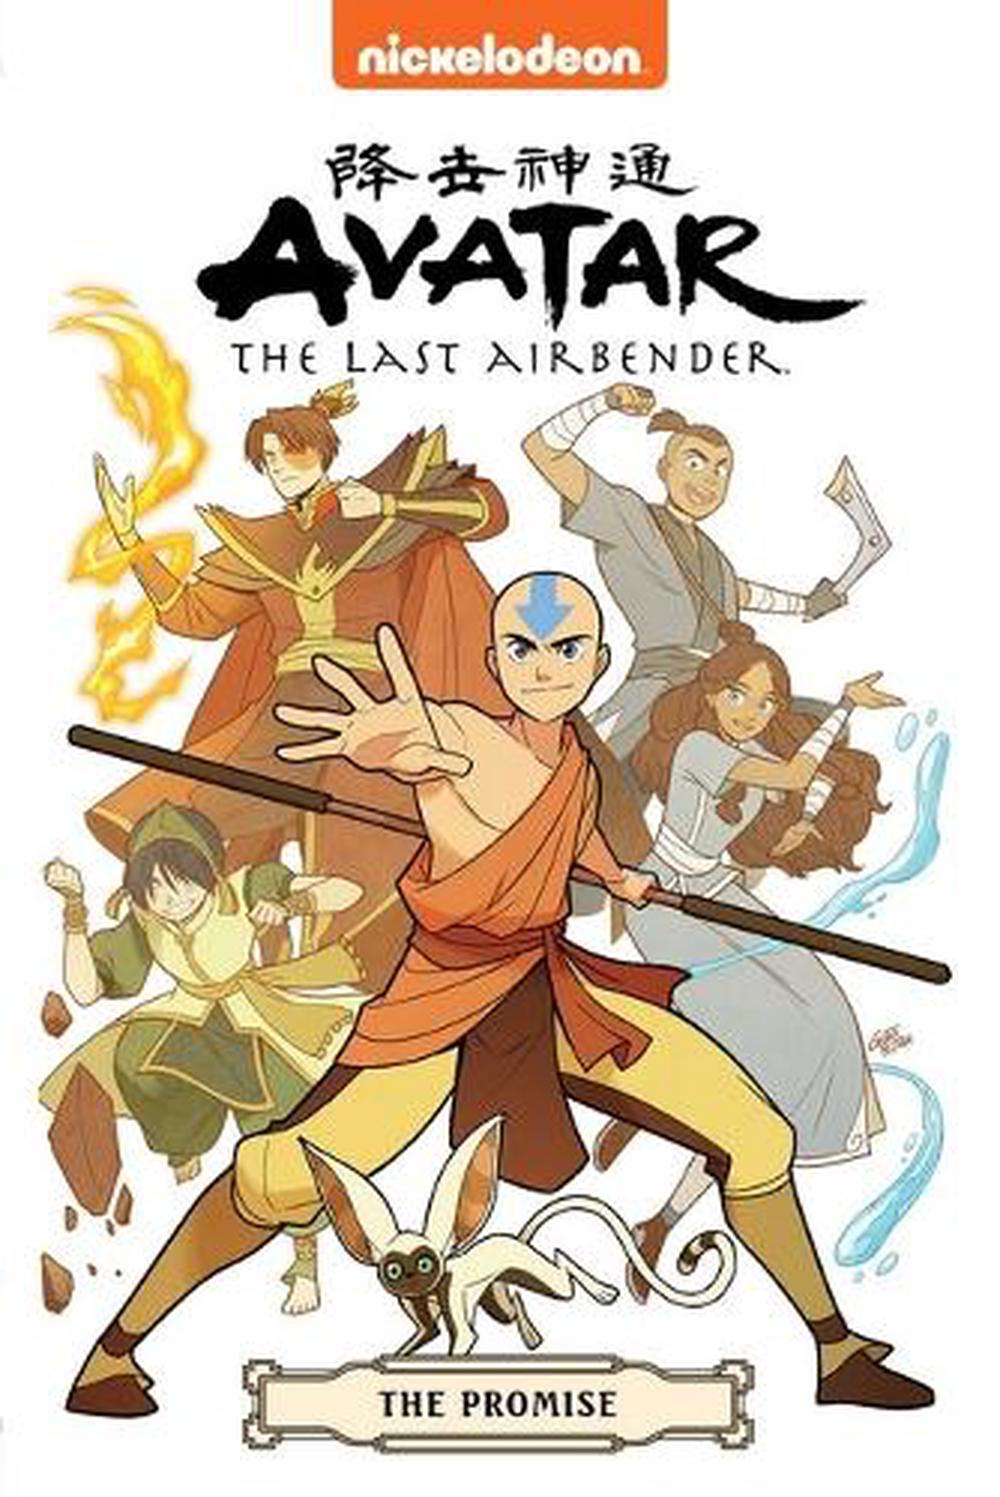 Avatar the Last Airbender: the Promise (Nickelodeon: Graphic Novel) by  Gene, Luen Yang, Paperback, 9781761299988 | Buy online at The Nile